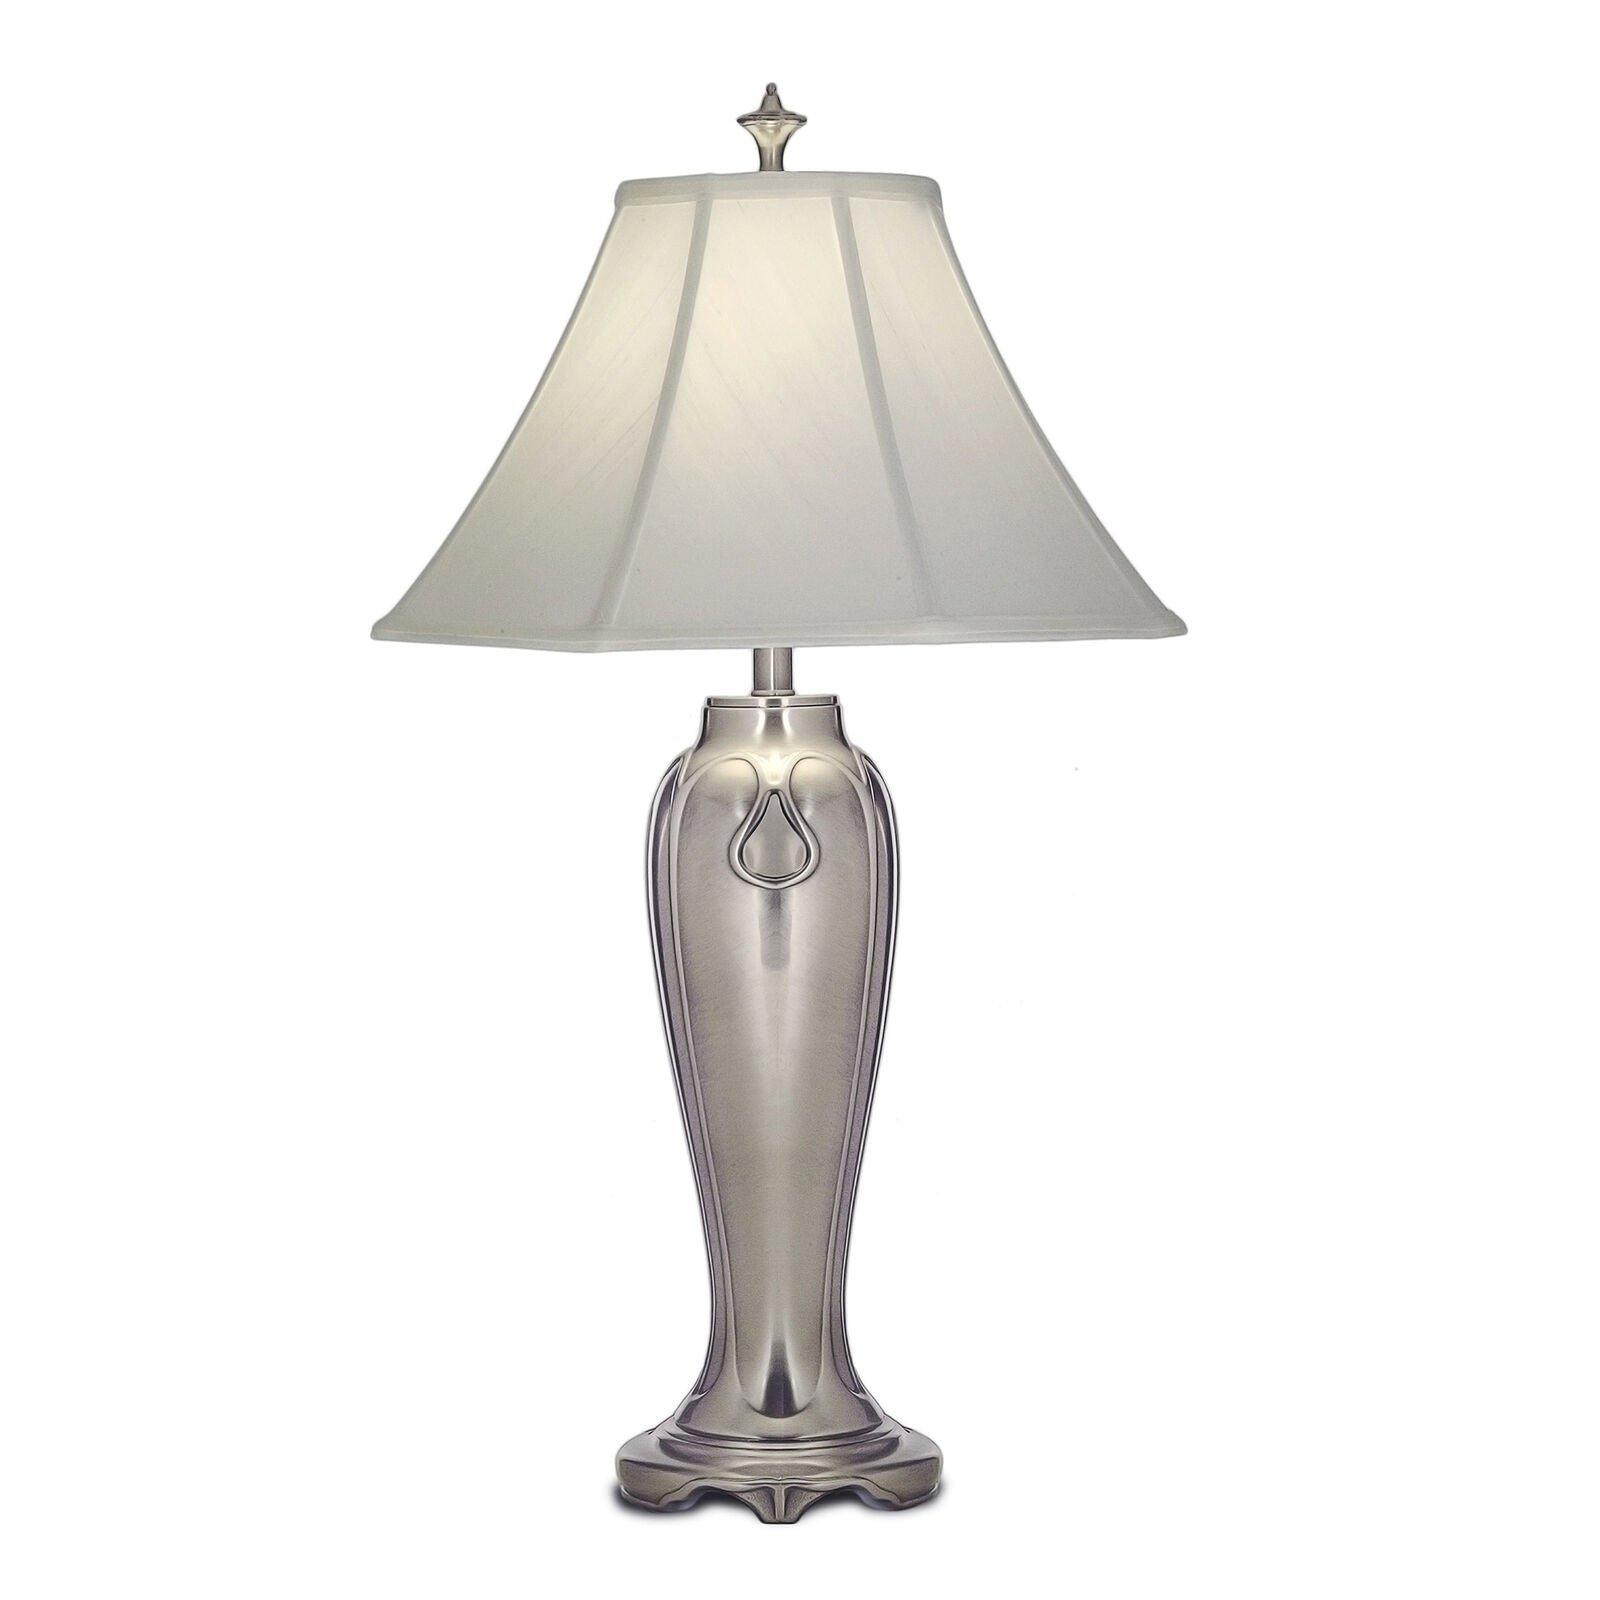 Table Lamp Silvered Look Off White Silk Shantung Shade Nickel LED E27 60W